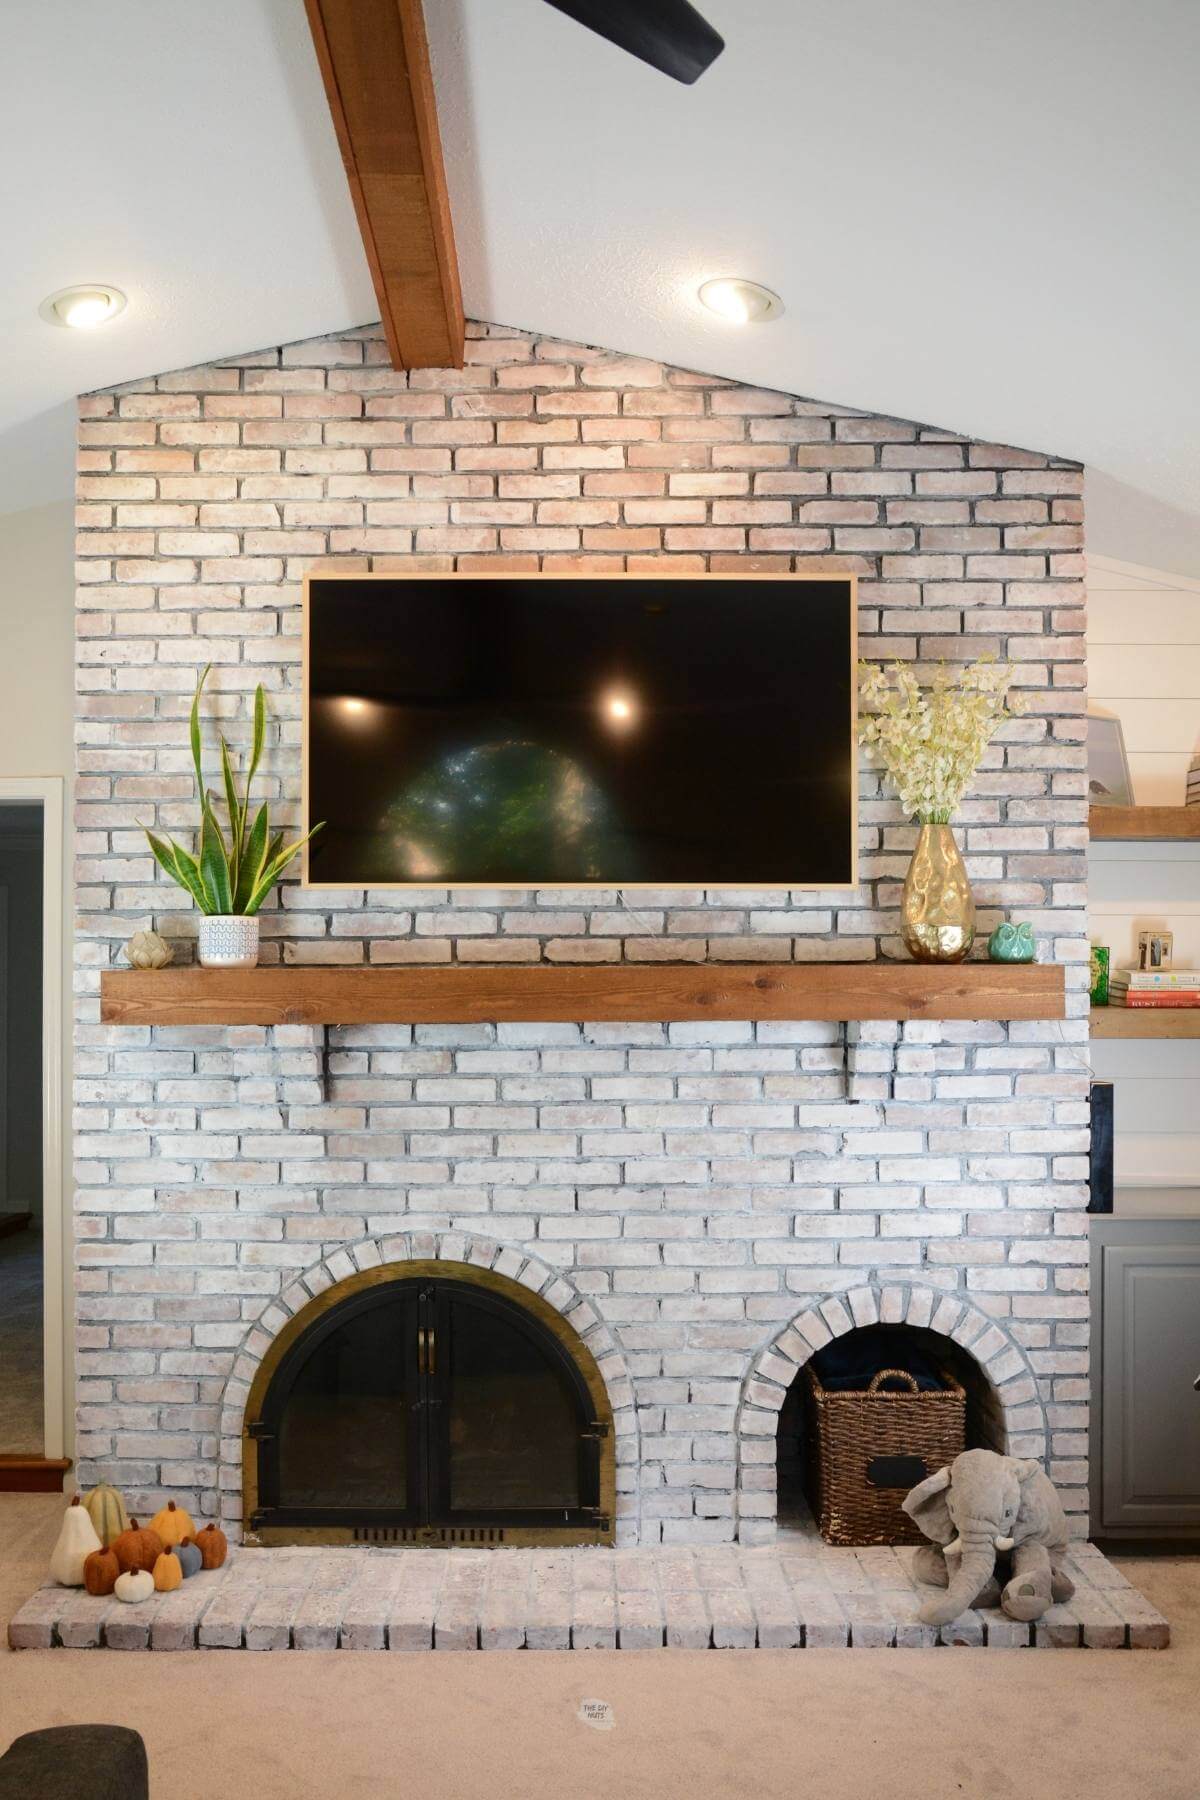 Final white washed large brick fireplace with wood beam and shelves.